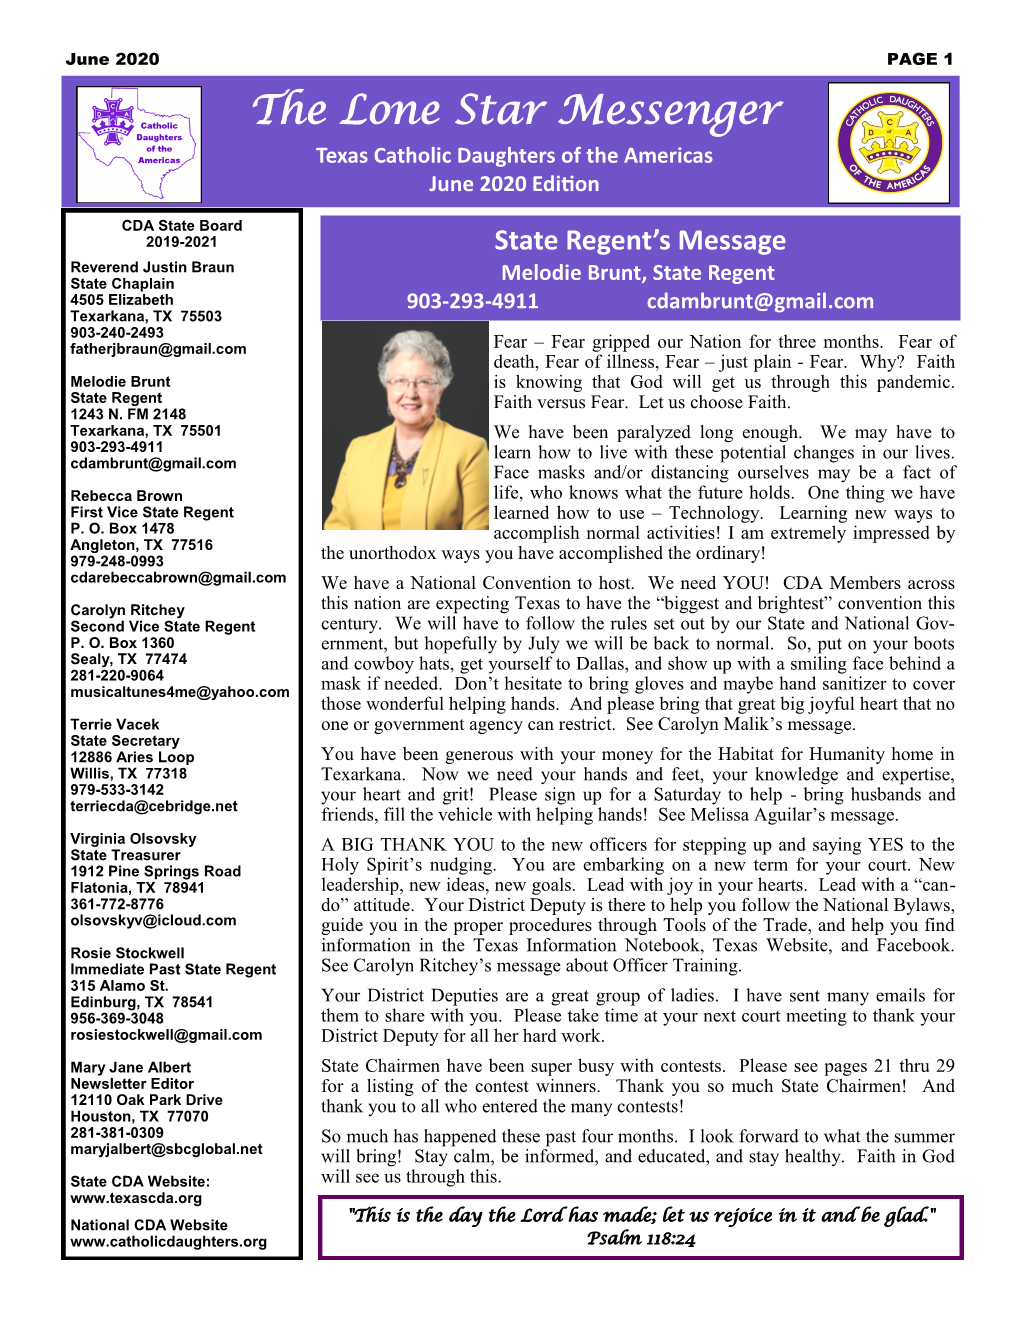 The Lone Star Messenger Texas Catholic Daughters of the Americas June 2020 Edition